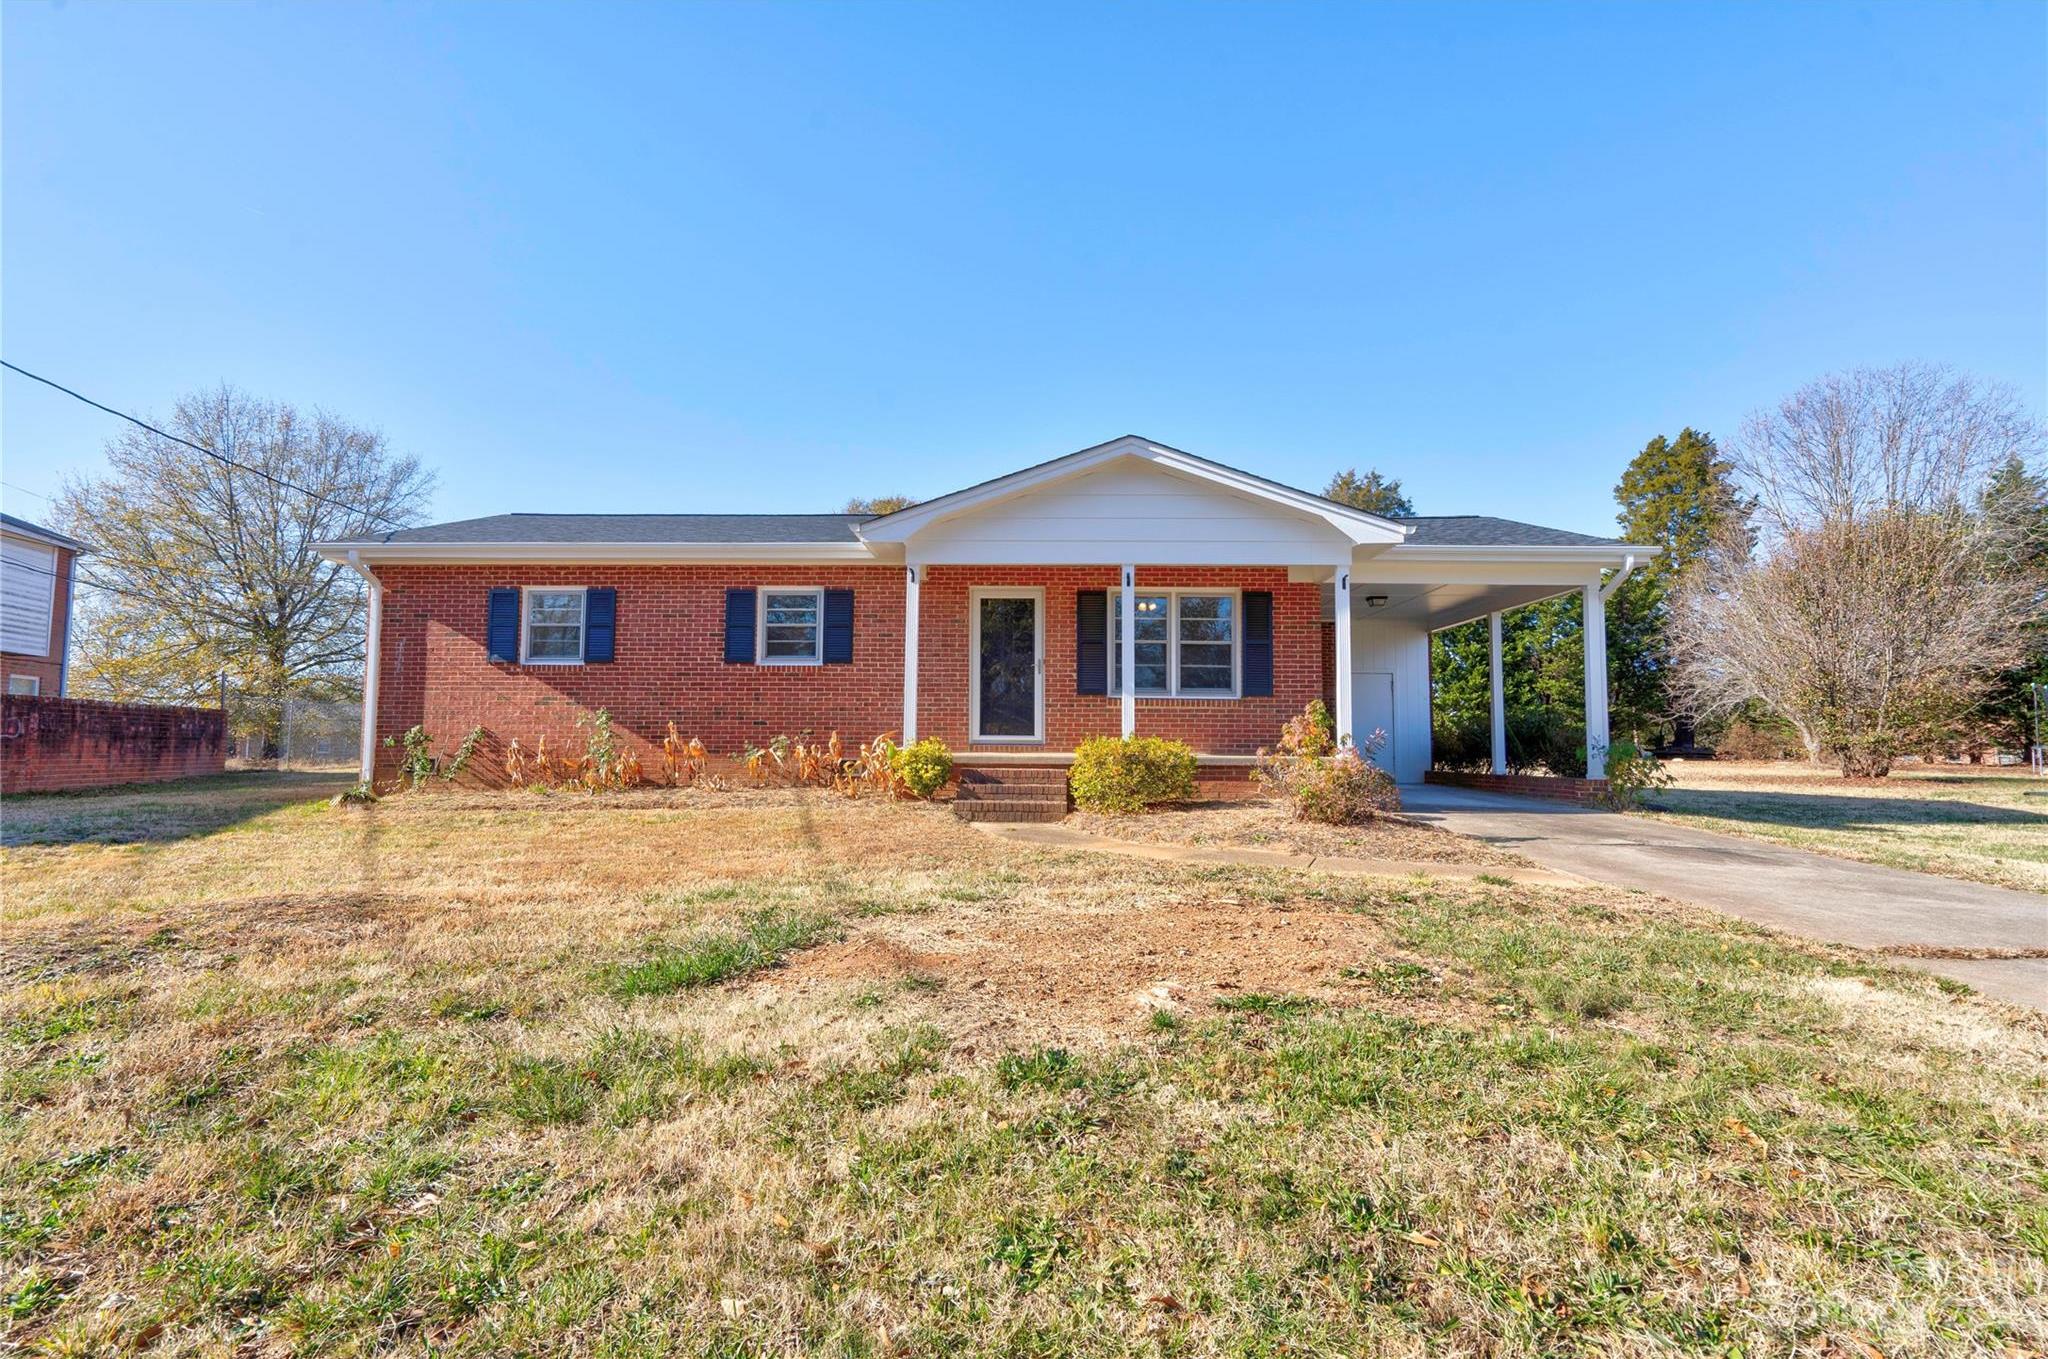 Photo one of 1411 Lenoir Dr Shelby NC 28150 | MLS 4091948